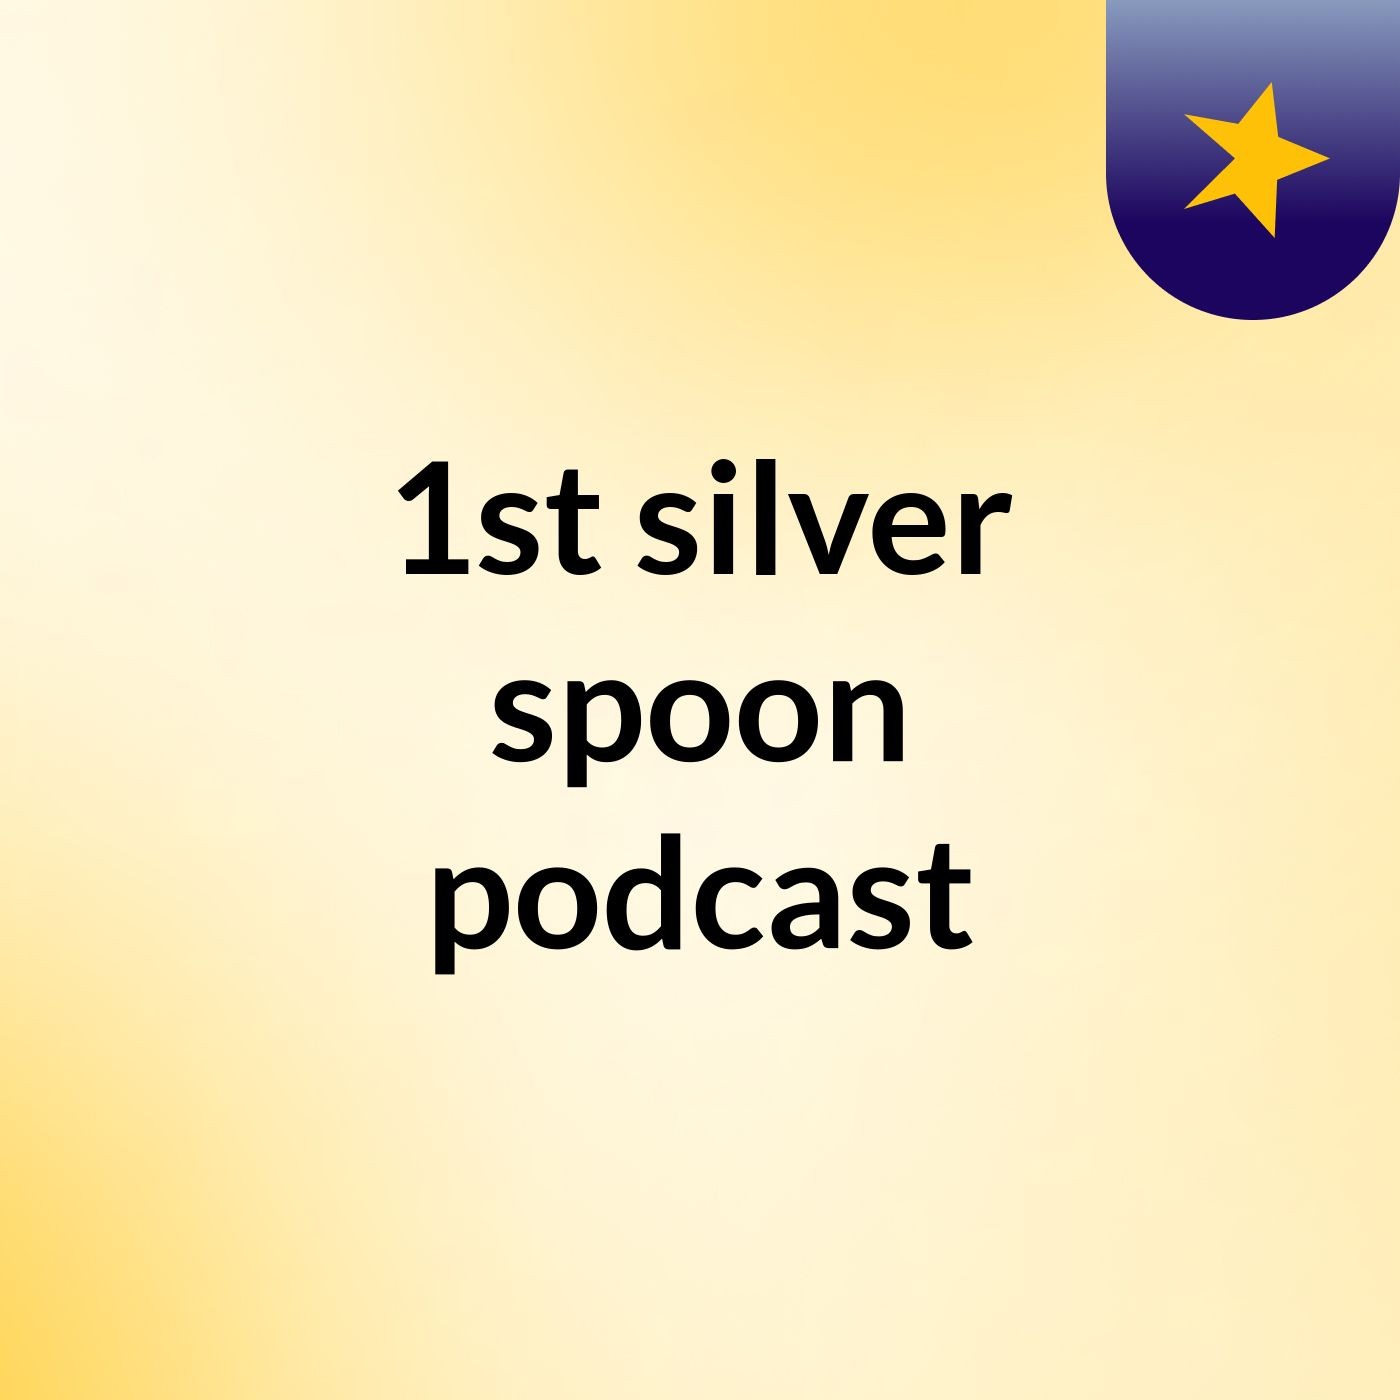 1st silver spoon podcast